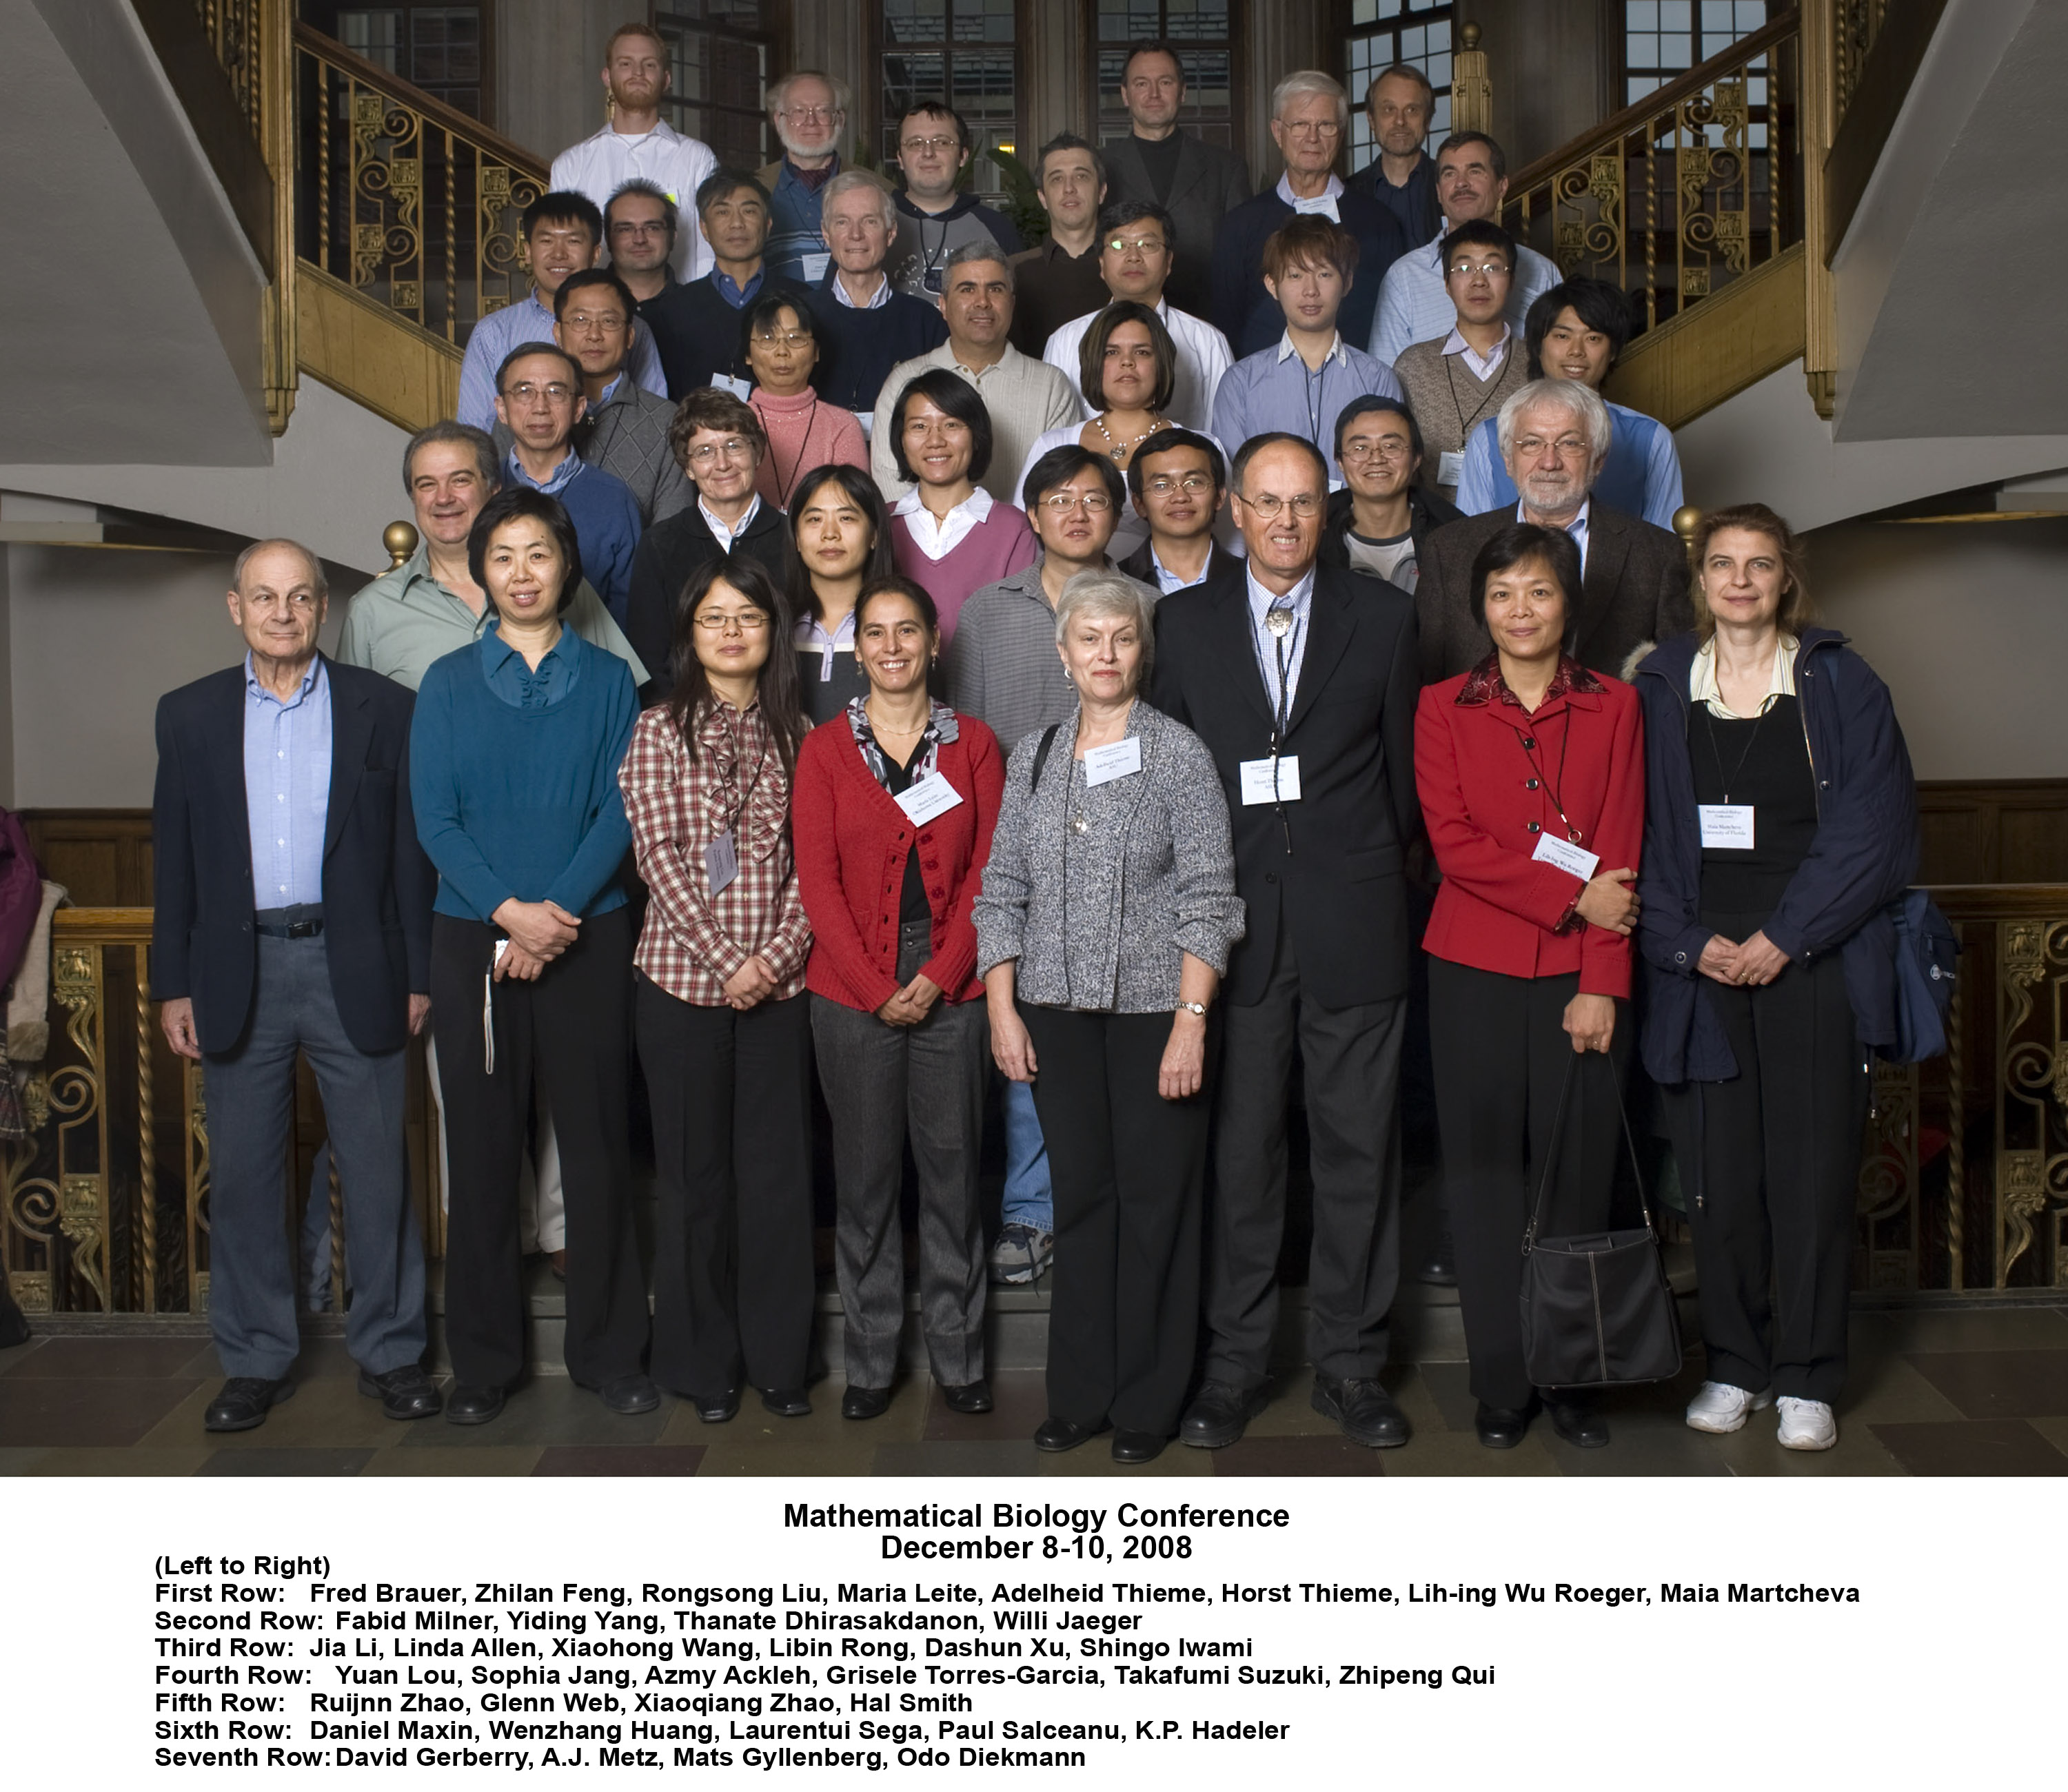 Mathematical biology conference group.